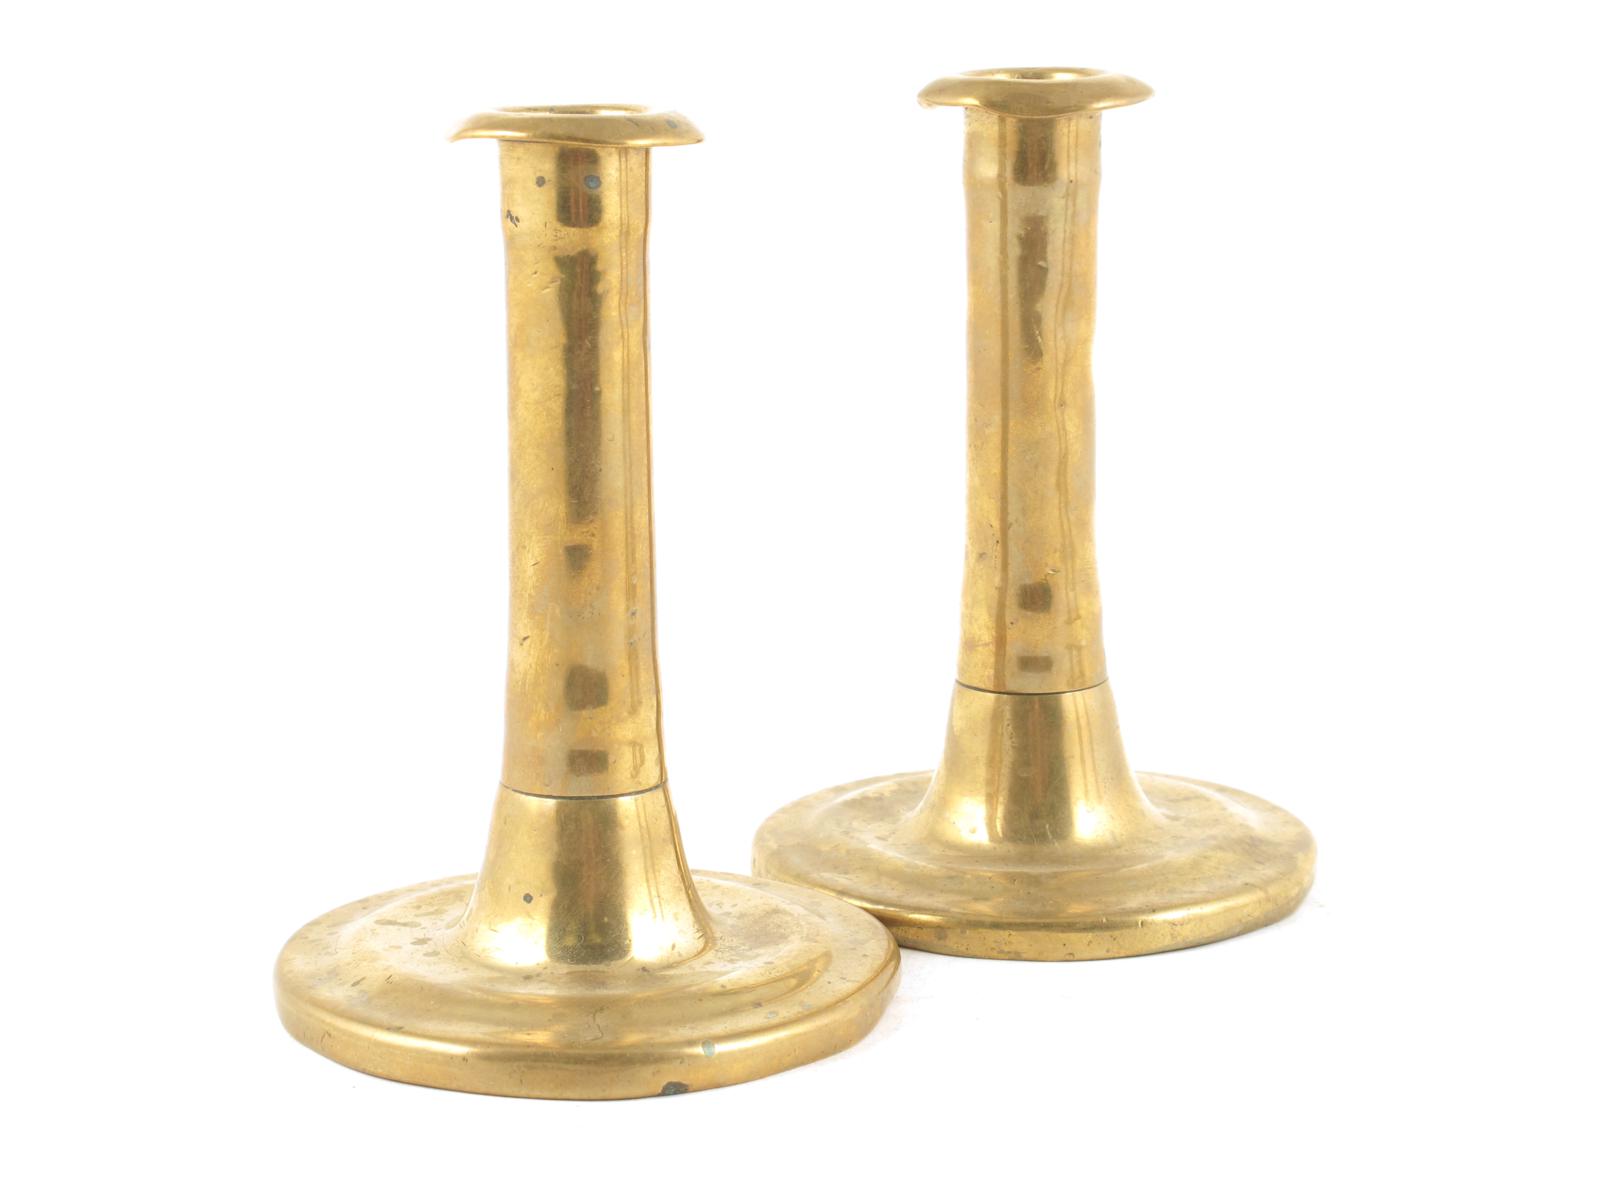 A pair of brass candlesticks, with ribbed stems, worn, late 17th / early 18th century, 5½in (13.8cm)